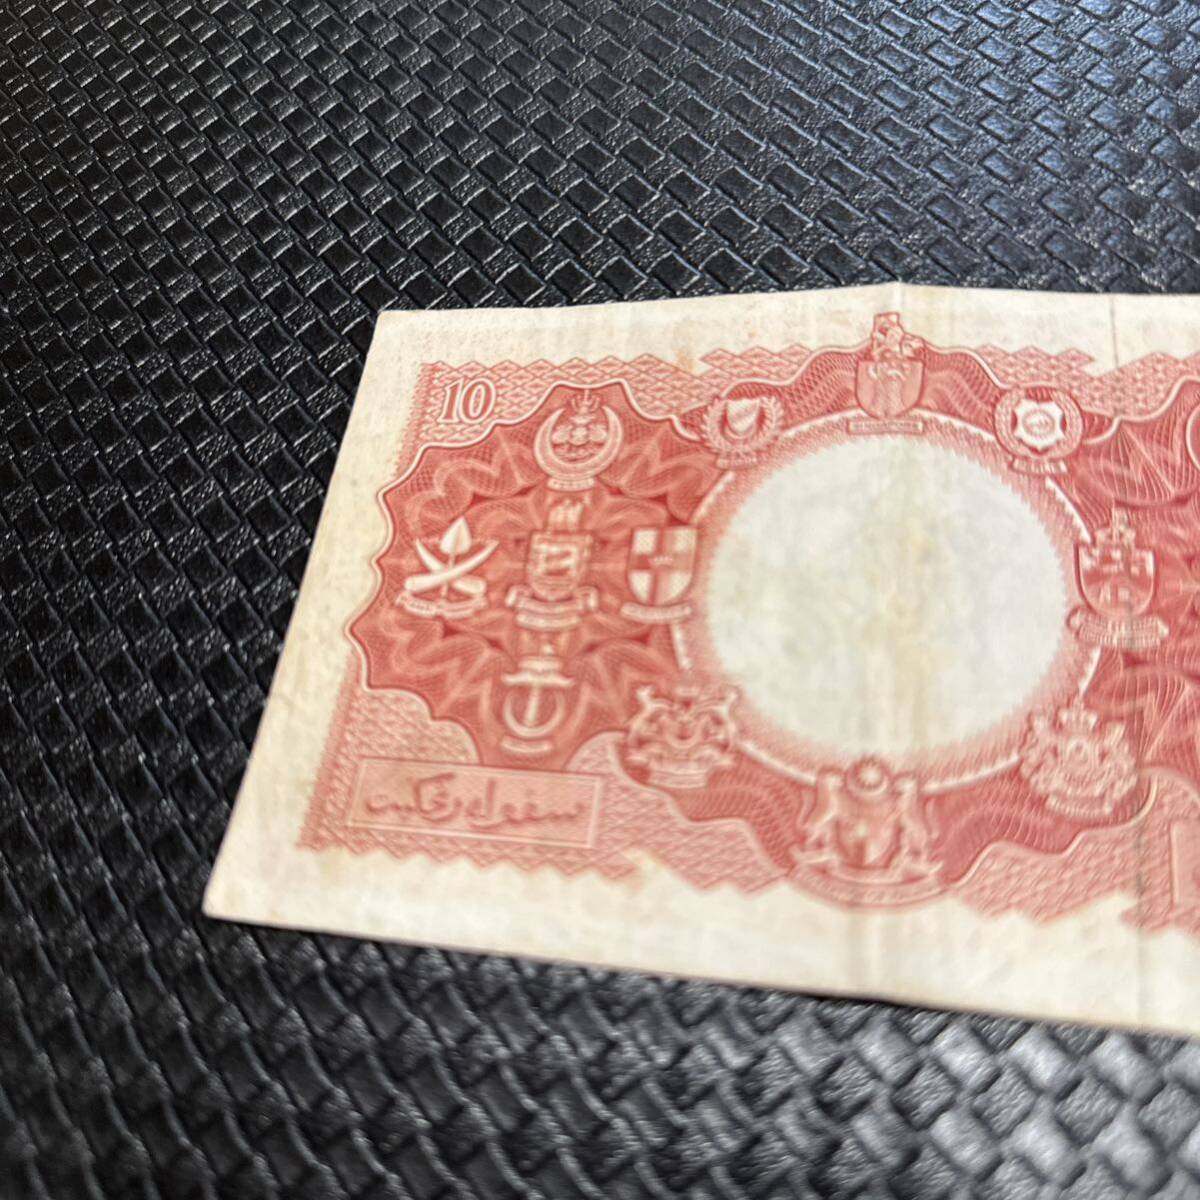  world note rare foreign note malaya britain .bo Rene o10 dollar bill old note 1953 year Elizabeth woman . old . England .